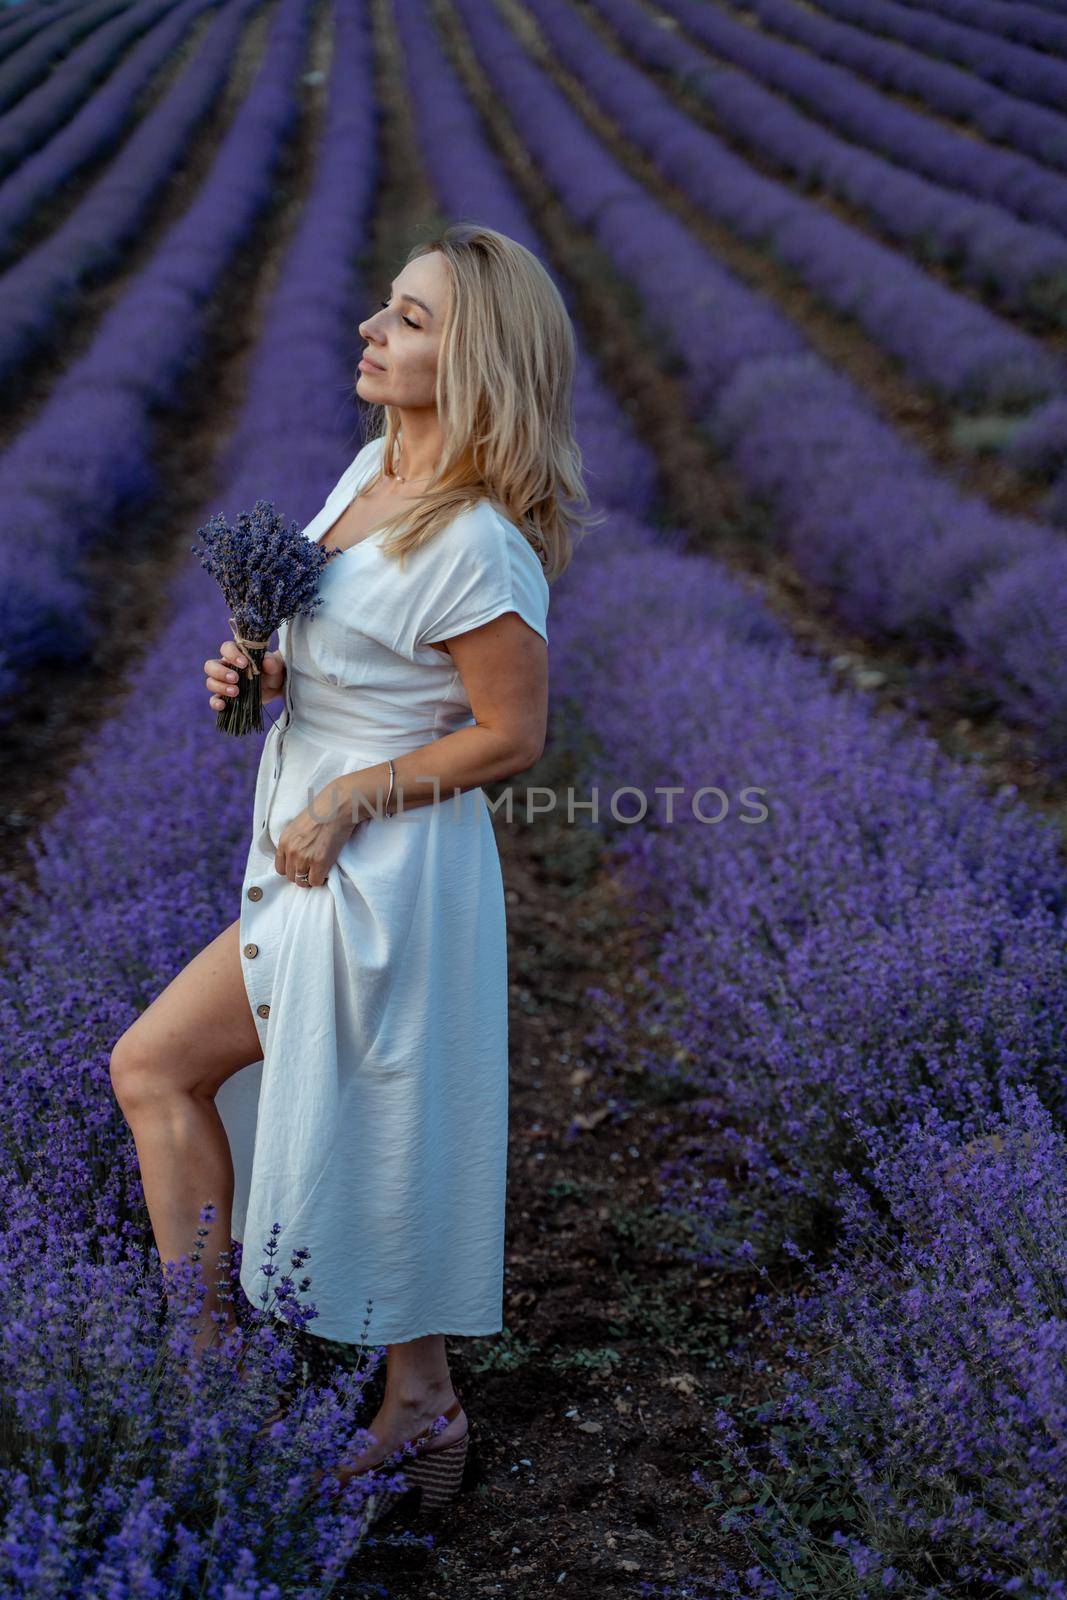 A middle-aged woman, blonde in a white dress, stands in a lavender field with a bouquet of lavender. A large flowering field in full bloom